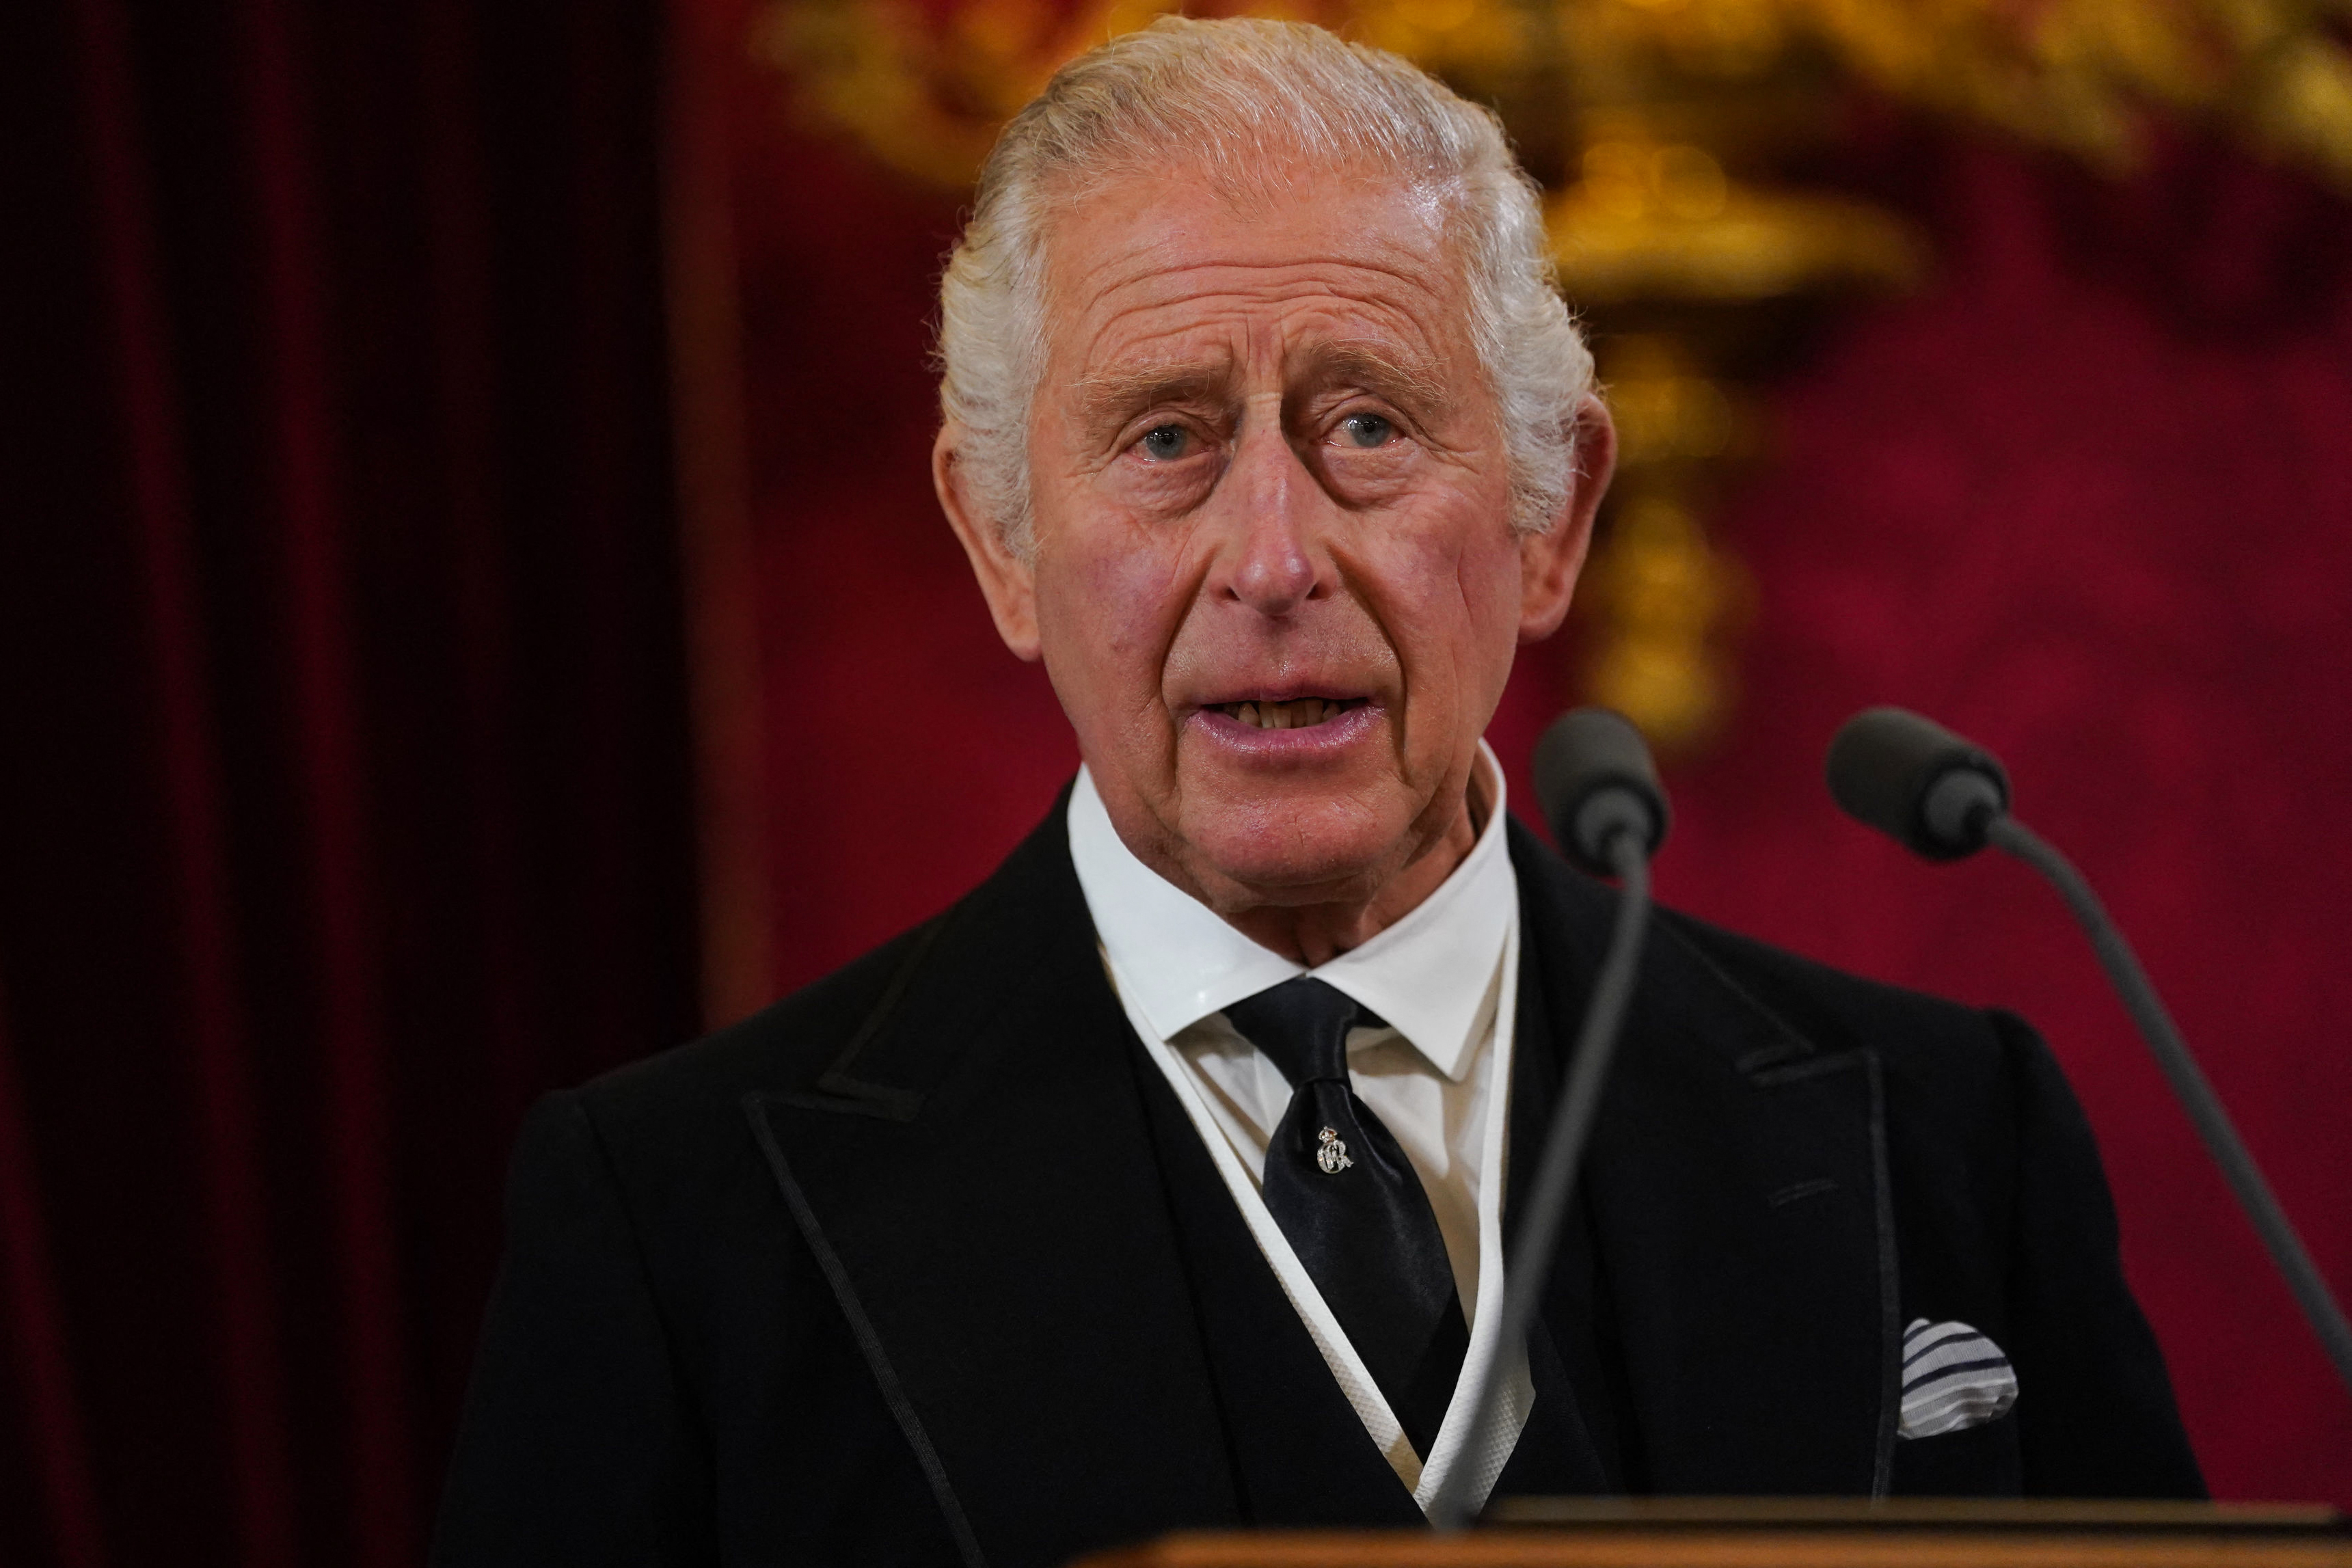 The King's speech: Charles III focuses Christmas address on climate,  conflict - National | Globalnews.ca